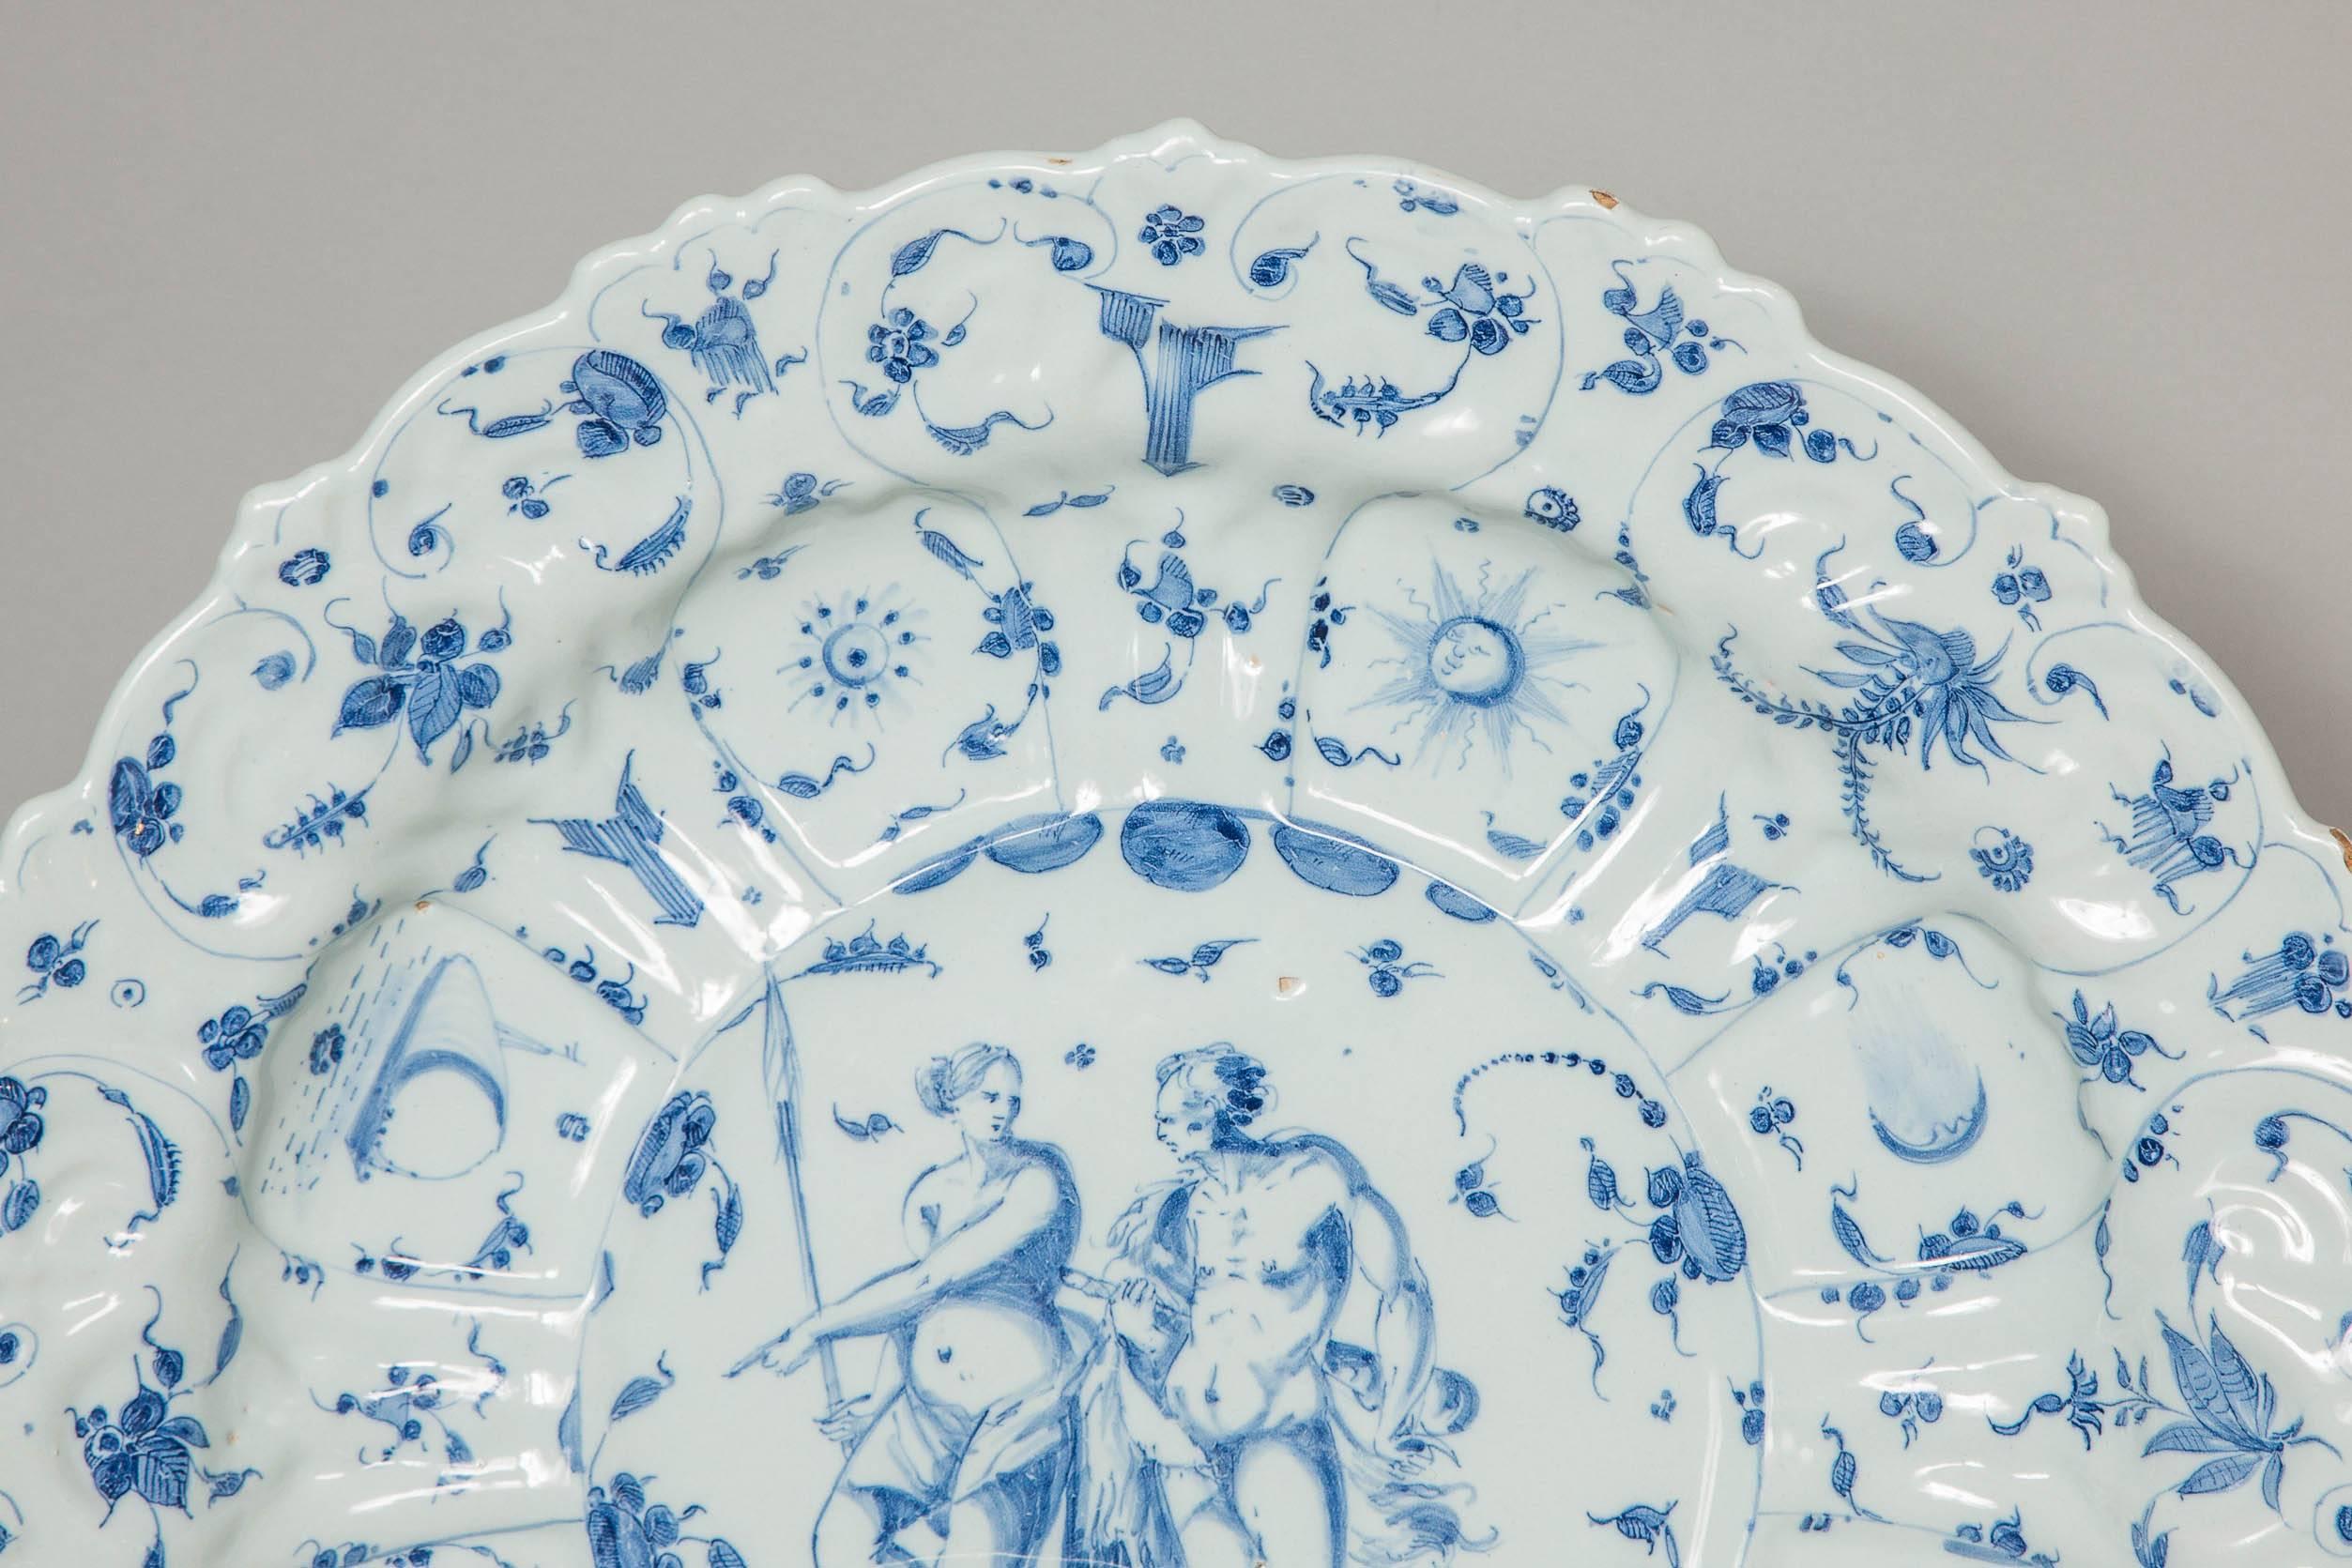 A large and rare Italian Savona blue and white charger dating 1670.
The large shaped plated decorated with so-called 